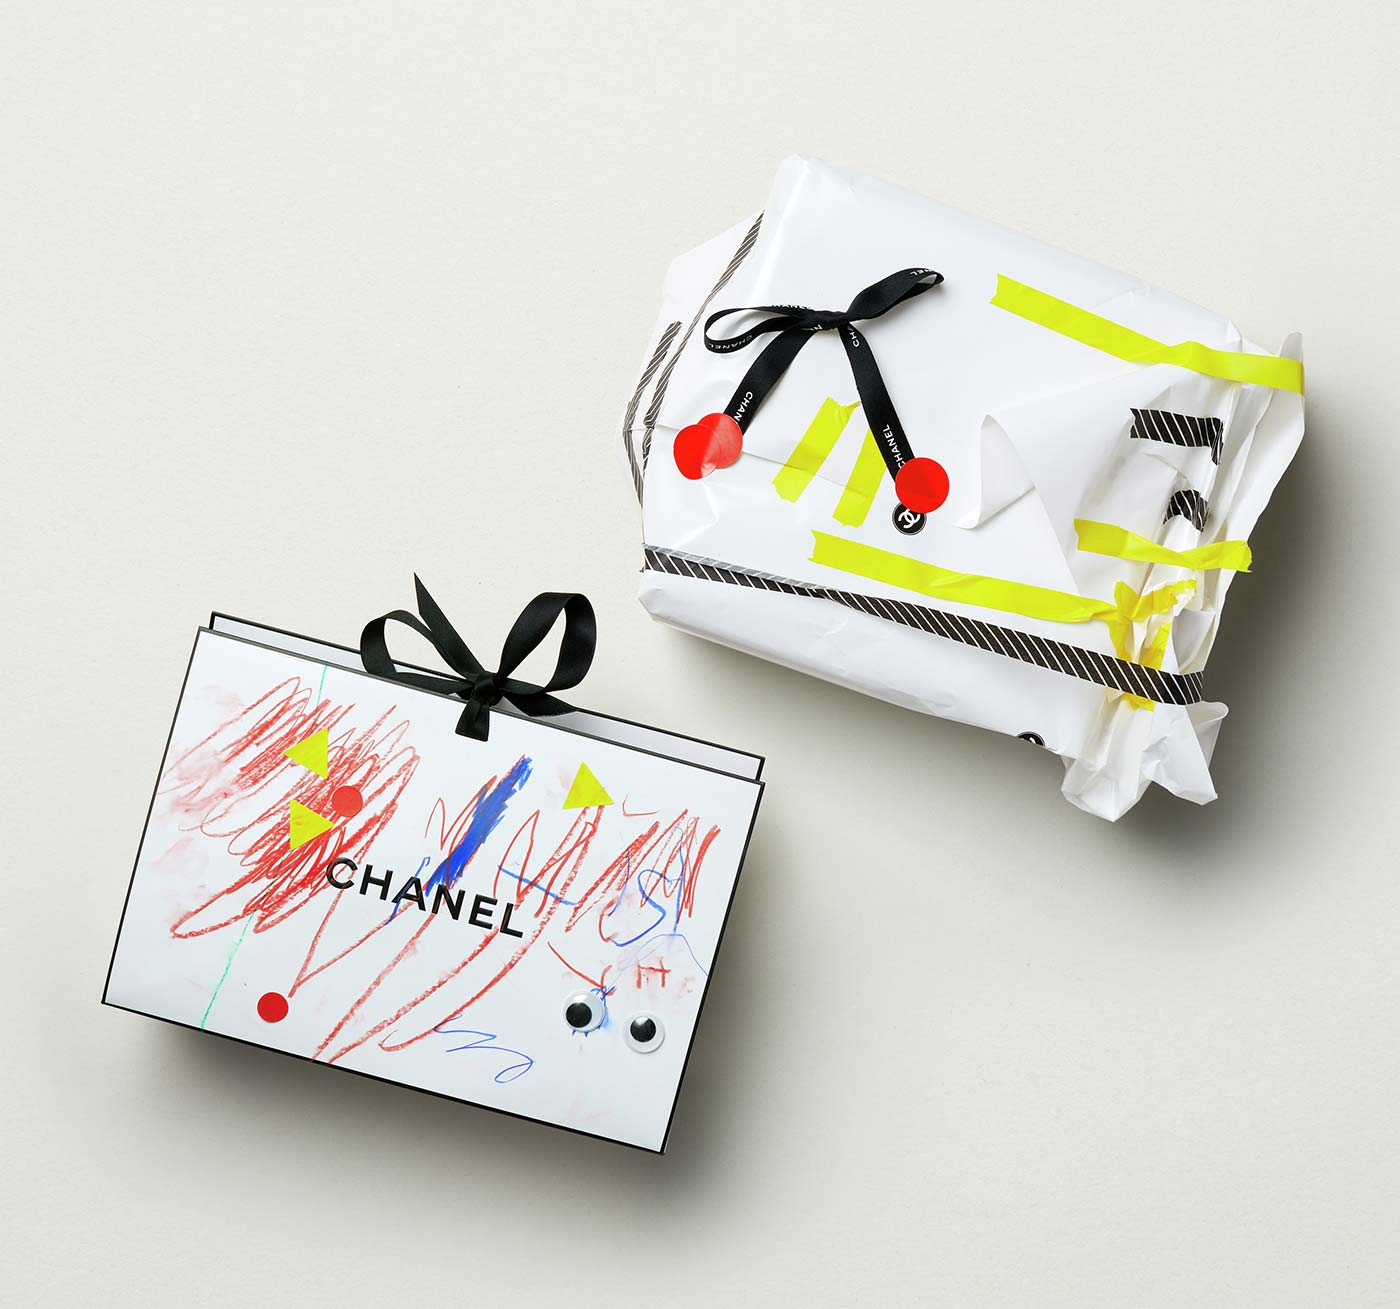 Gift-wrapped packaging